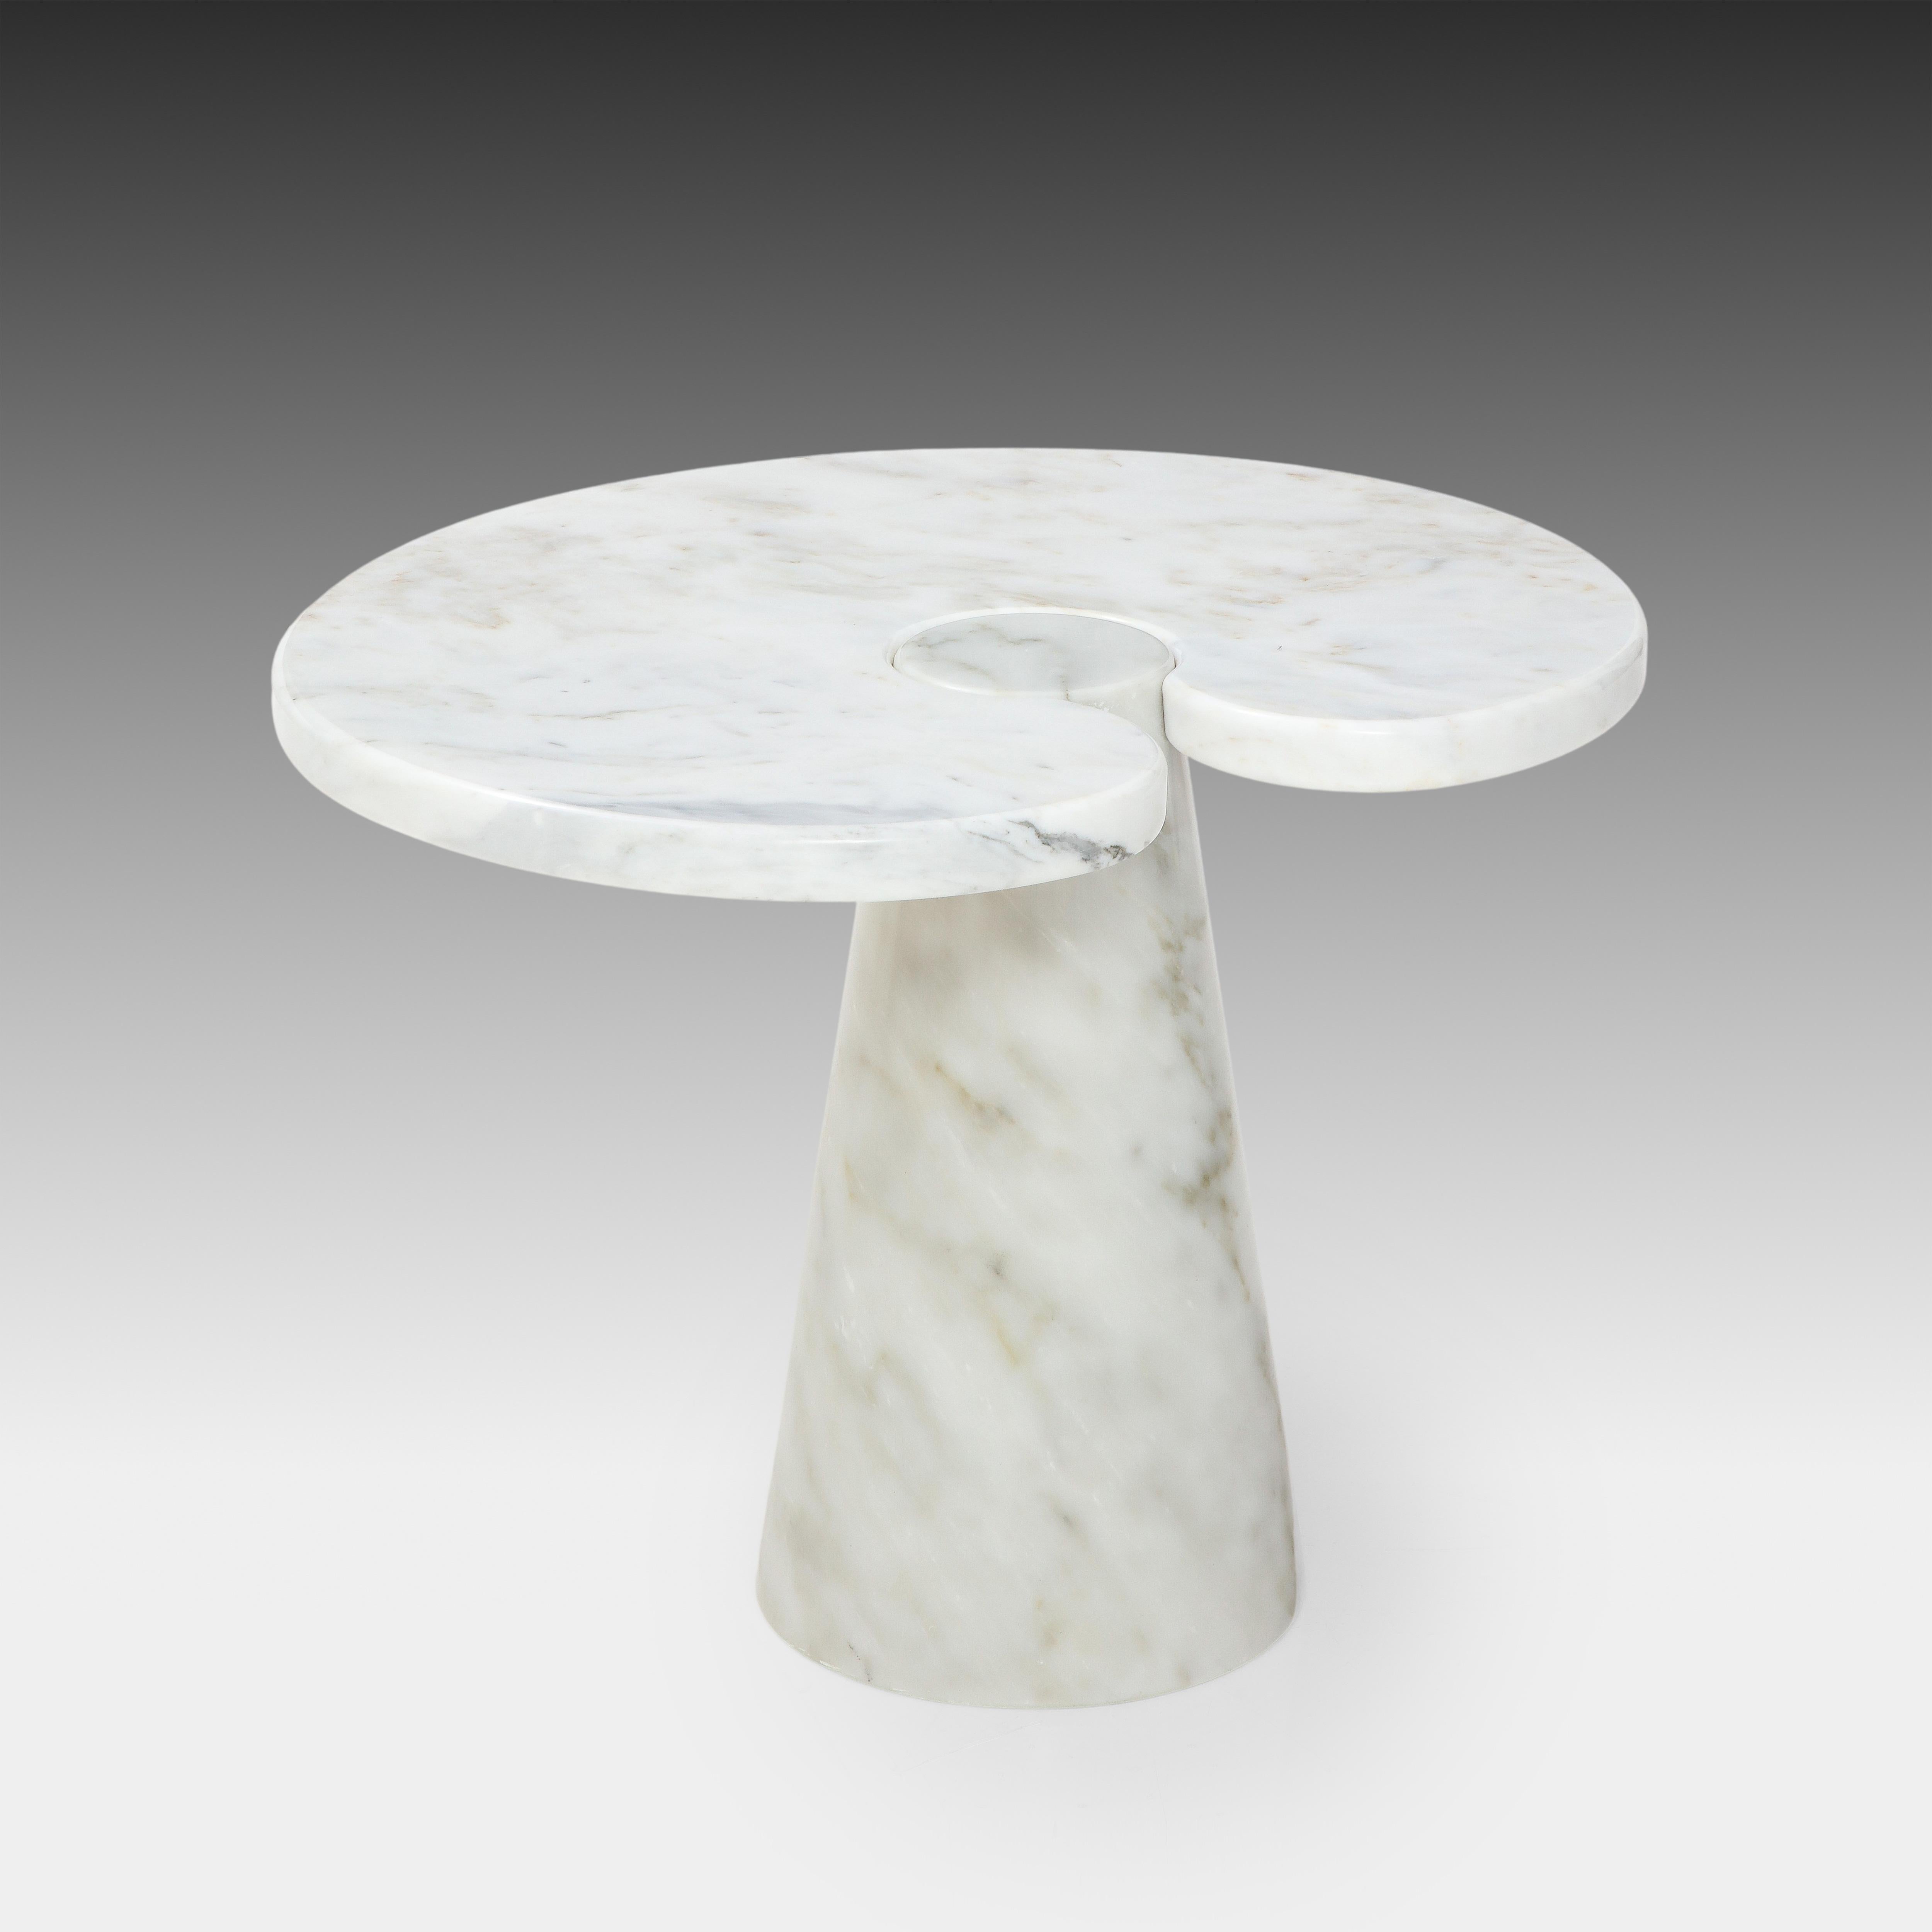 Angelo Mangiarotti Carrara Marble Side Table from 'Eros' Series, 1971 In Good Condition For Sale In New York, NY